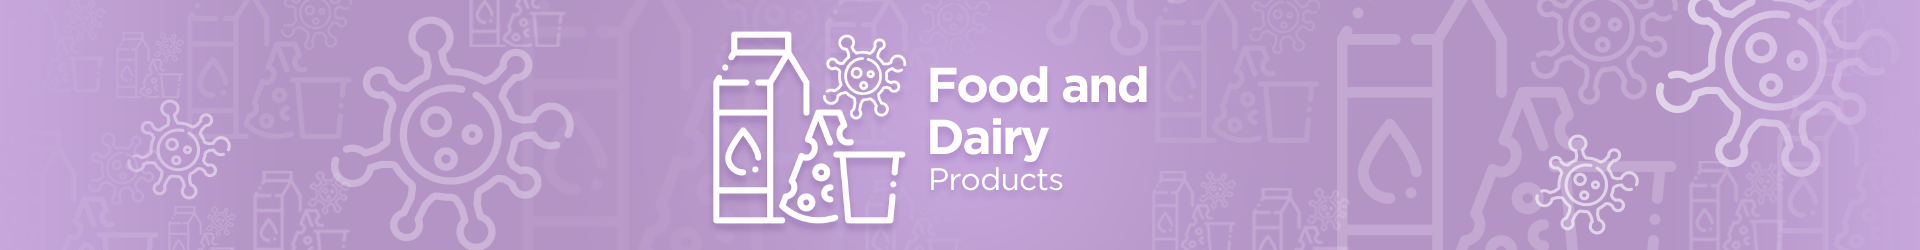 Food and Dairy Industries Inslider